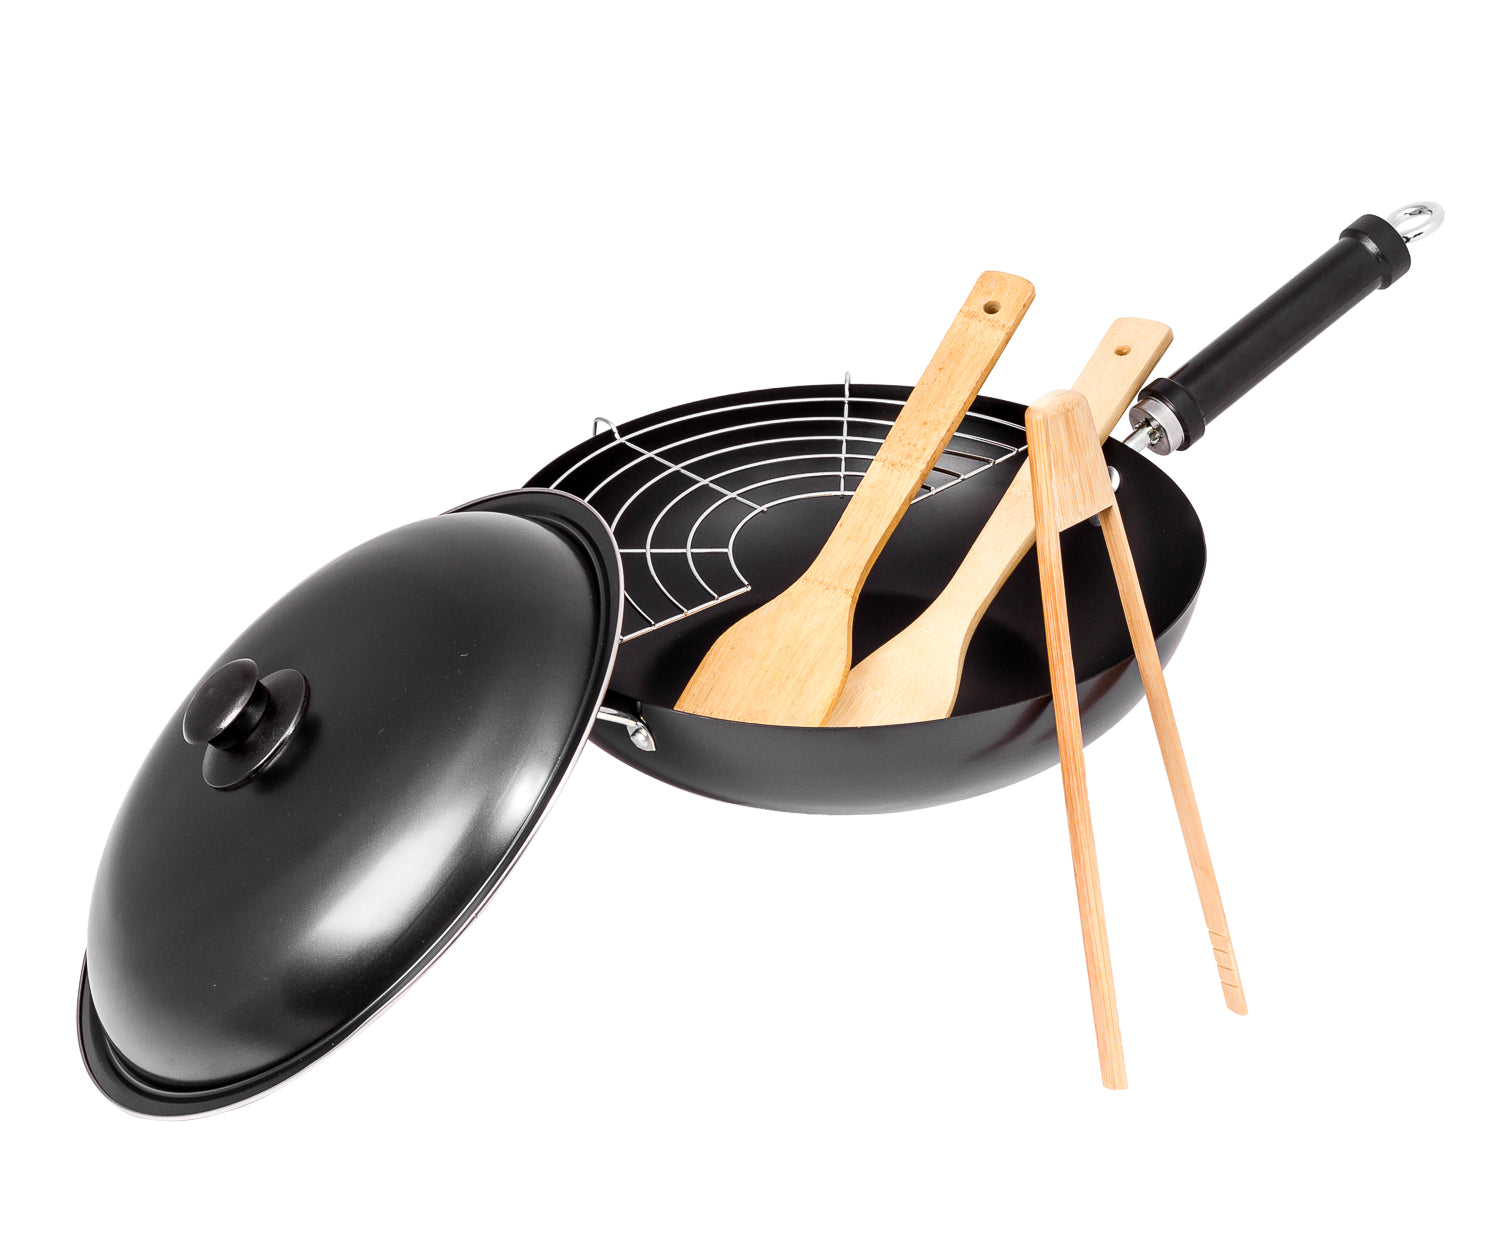 12” Carbon Steel Wok with Spatula, Tongs, Spoon, Grill, and Lid – Nonstick Wok with Wok Tools